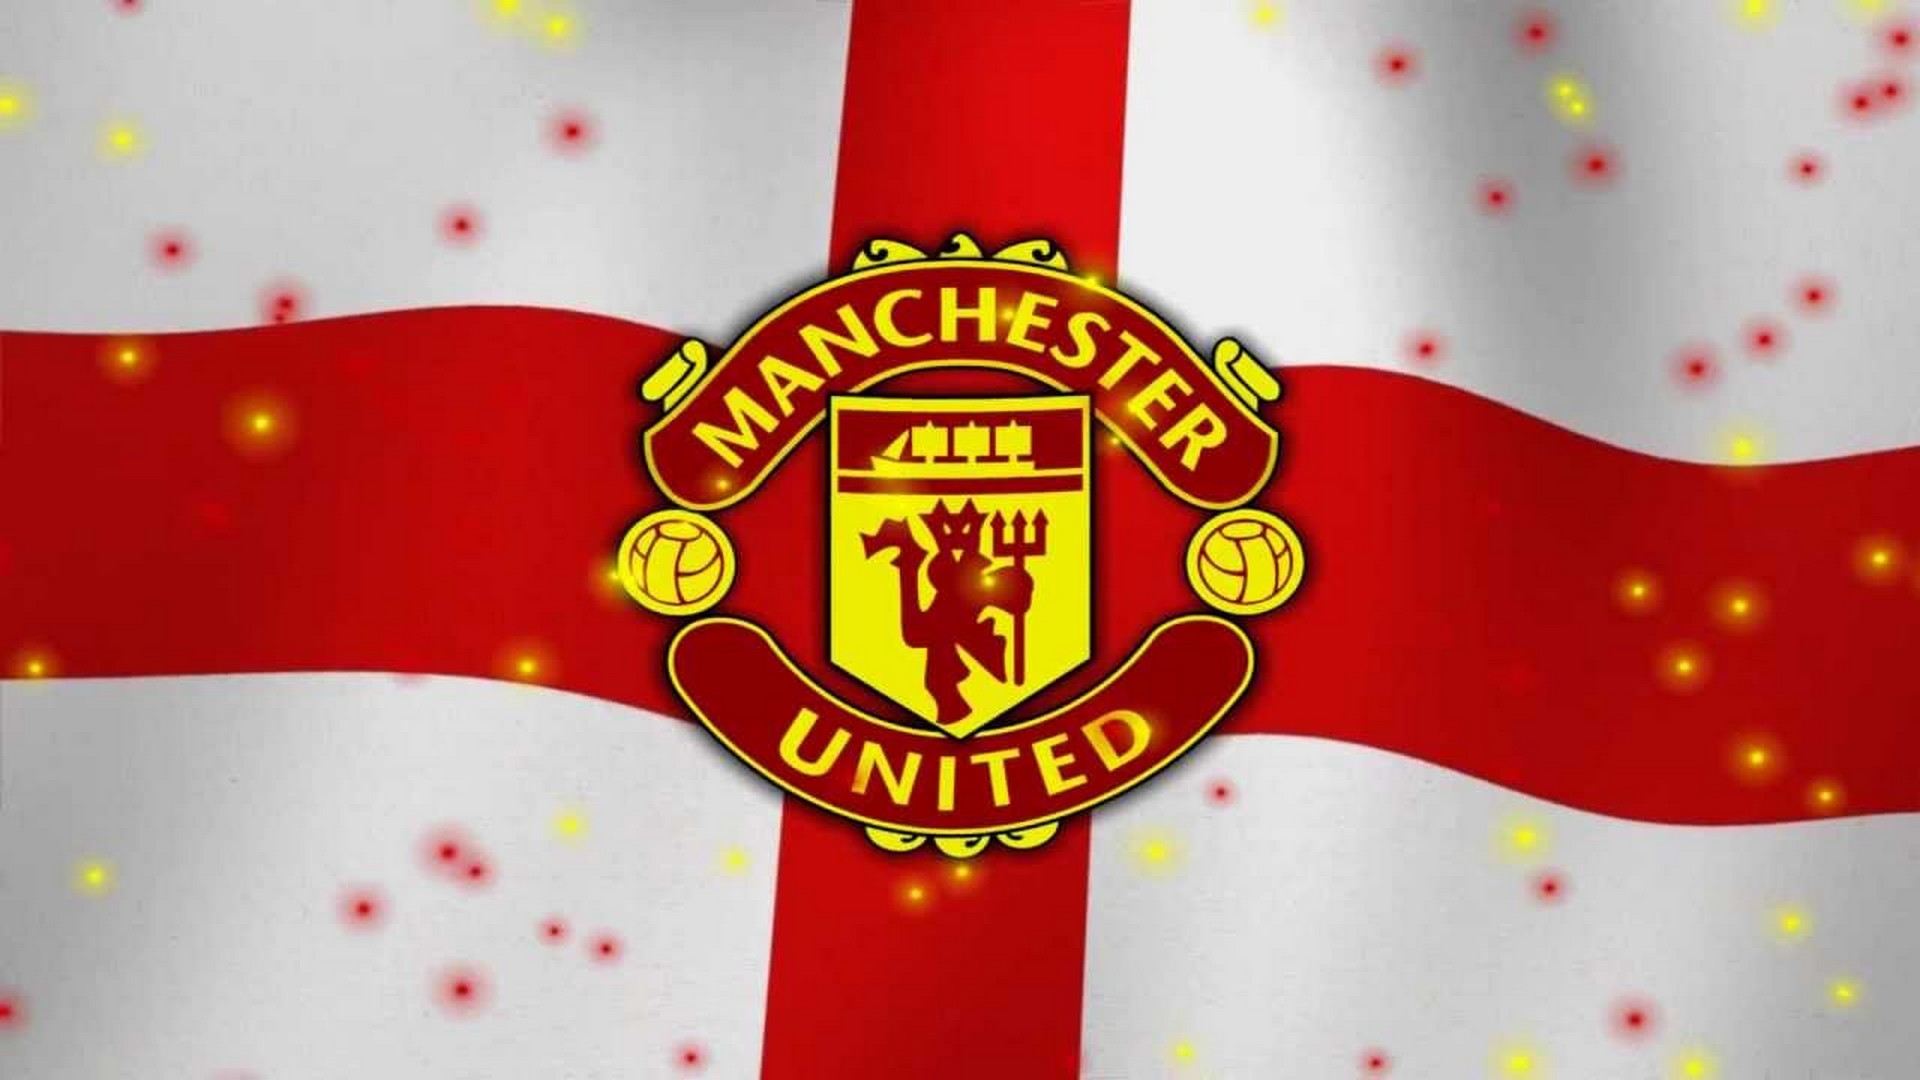 Manchester United Wallpaper For Mac Backgrounds with high-resolution 1920x1080 pixel. You can use this wallpaper for your Desktop Computers, Mac Screensavers, Windows Backgrounds, iPhone Wallpapers, Tablet or Android Lock screen and another Mobile device